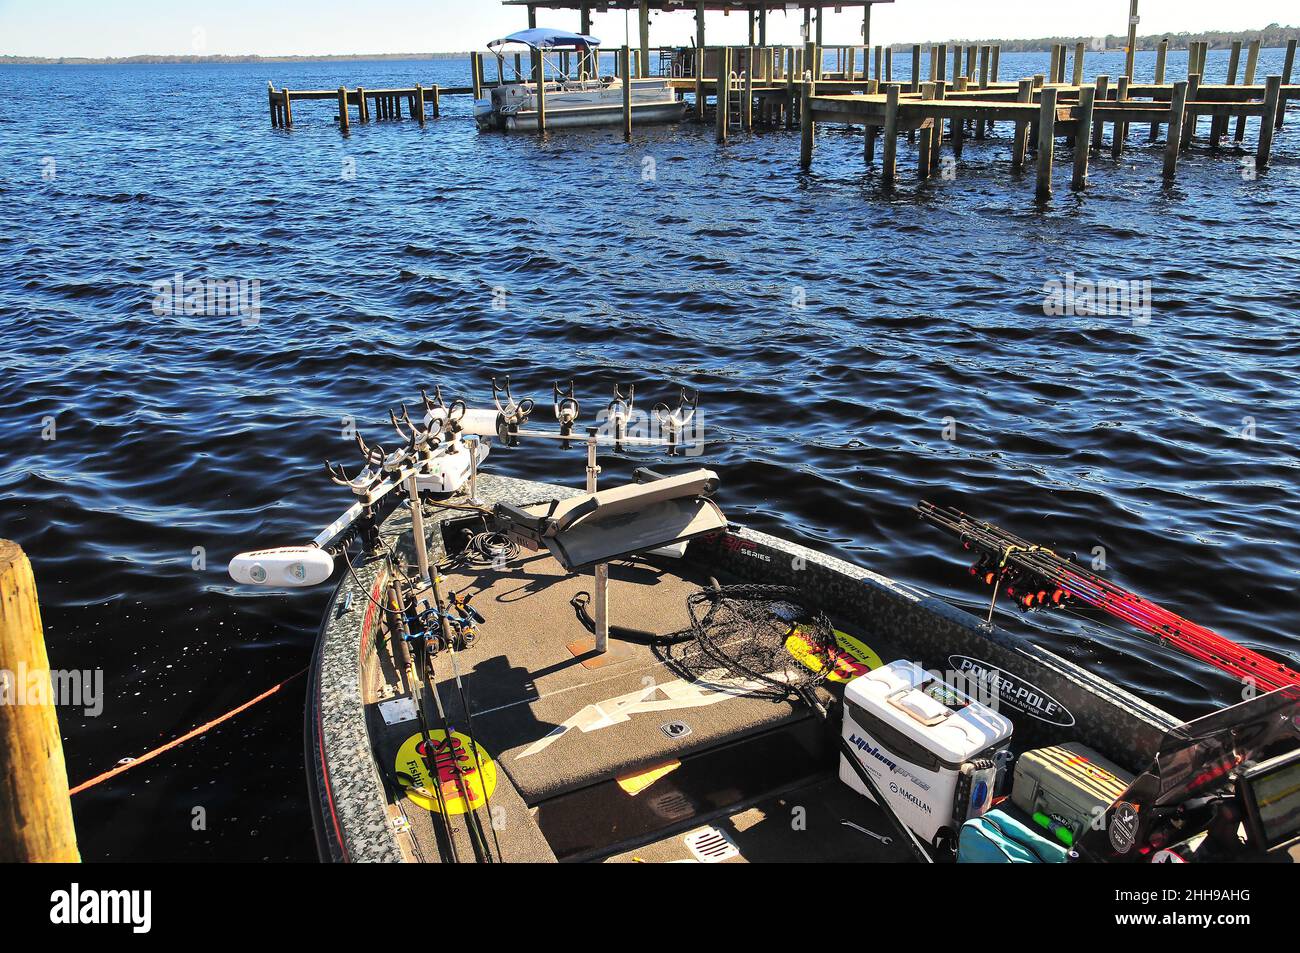 https://c8.alamy.com/comp/2HH9AHG/electronics-trolling-motors-rod-holders-powerpoles-and-a-comfortable-boat-are-vital-to-successful-crappie-fishing-2HH9AHG.jpg